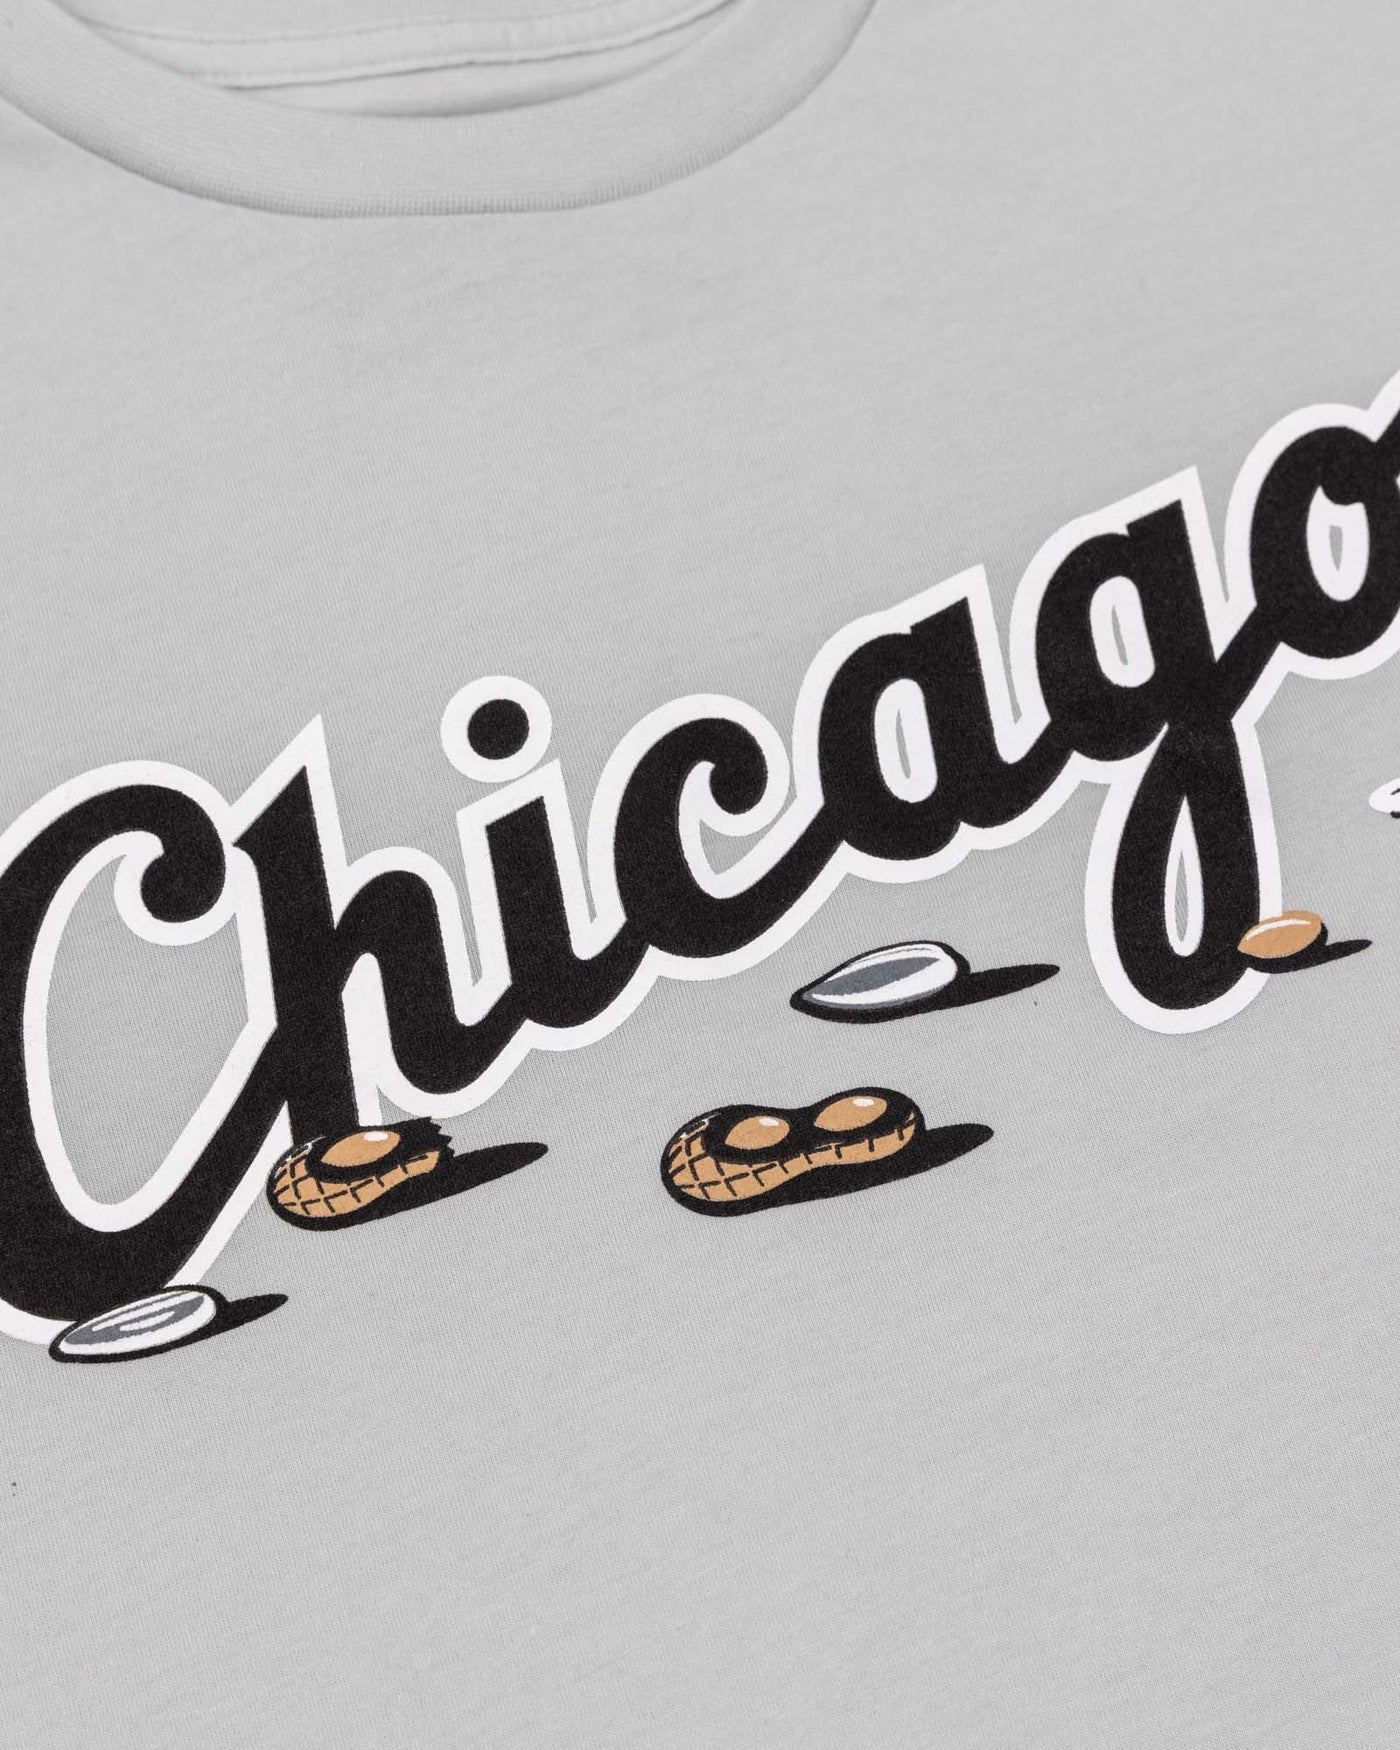 Get Your Peanuts! - Chicago White Sox